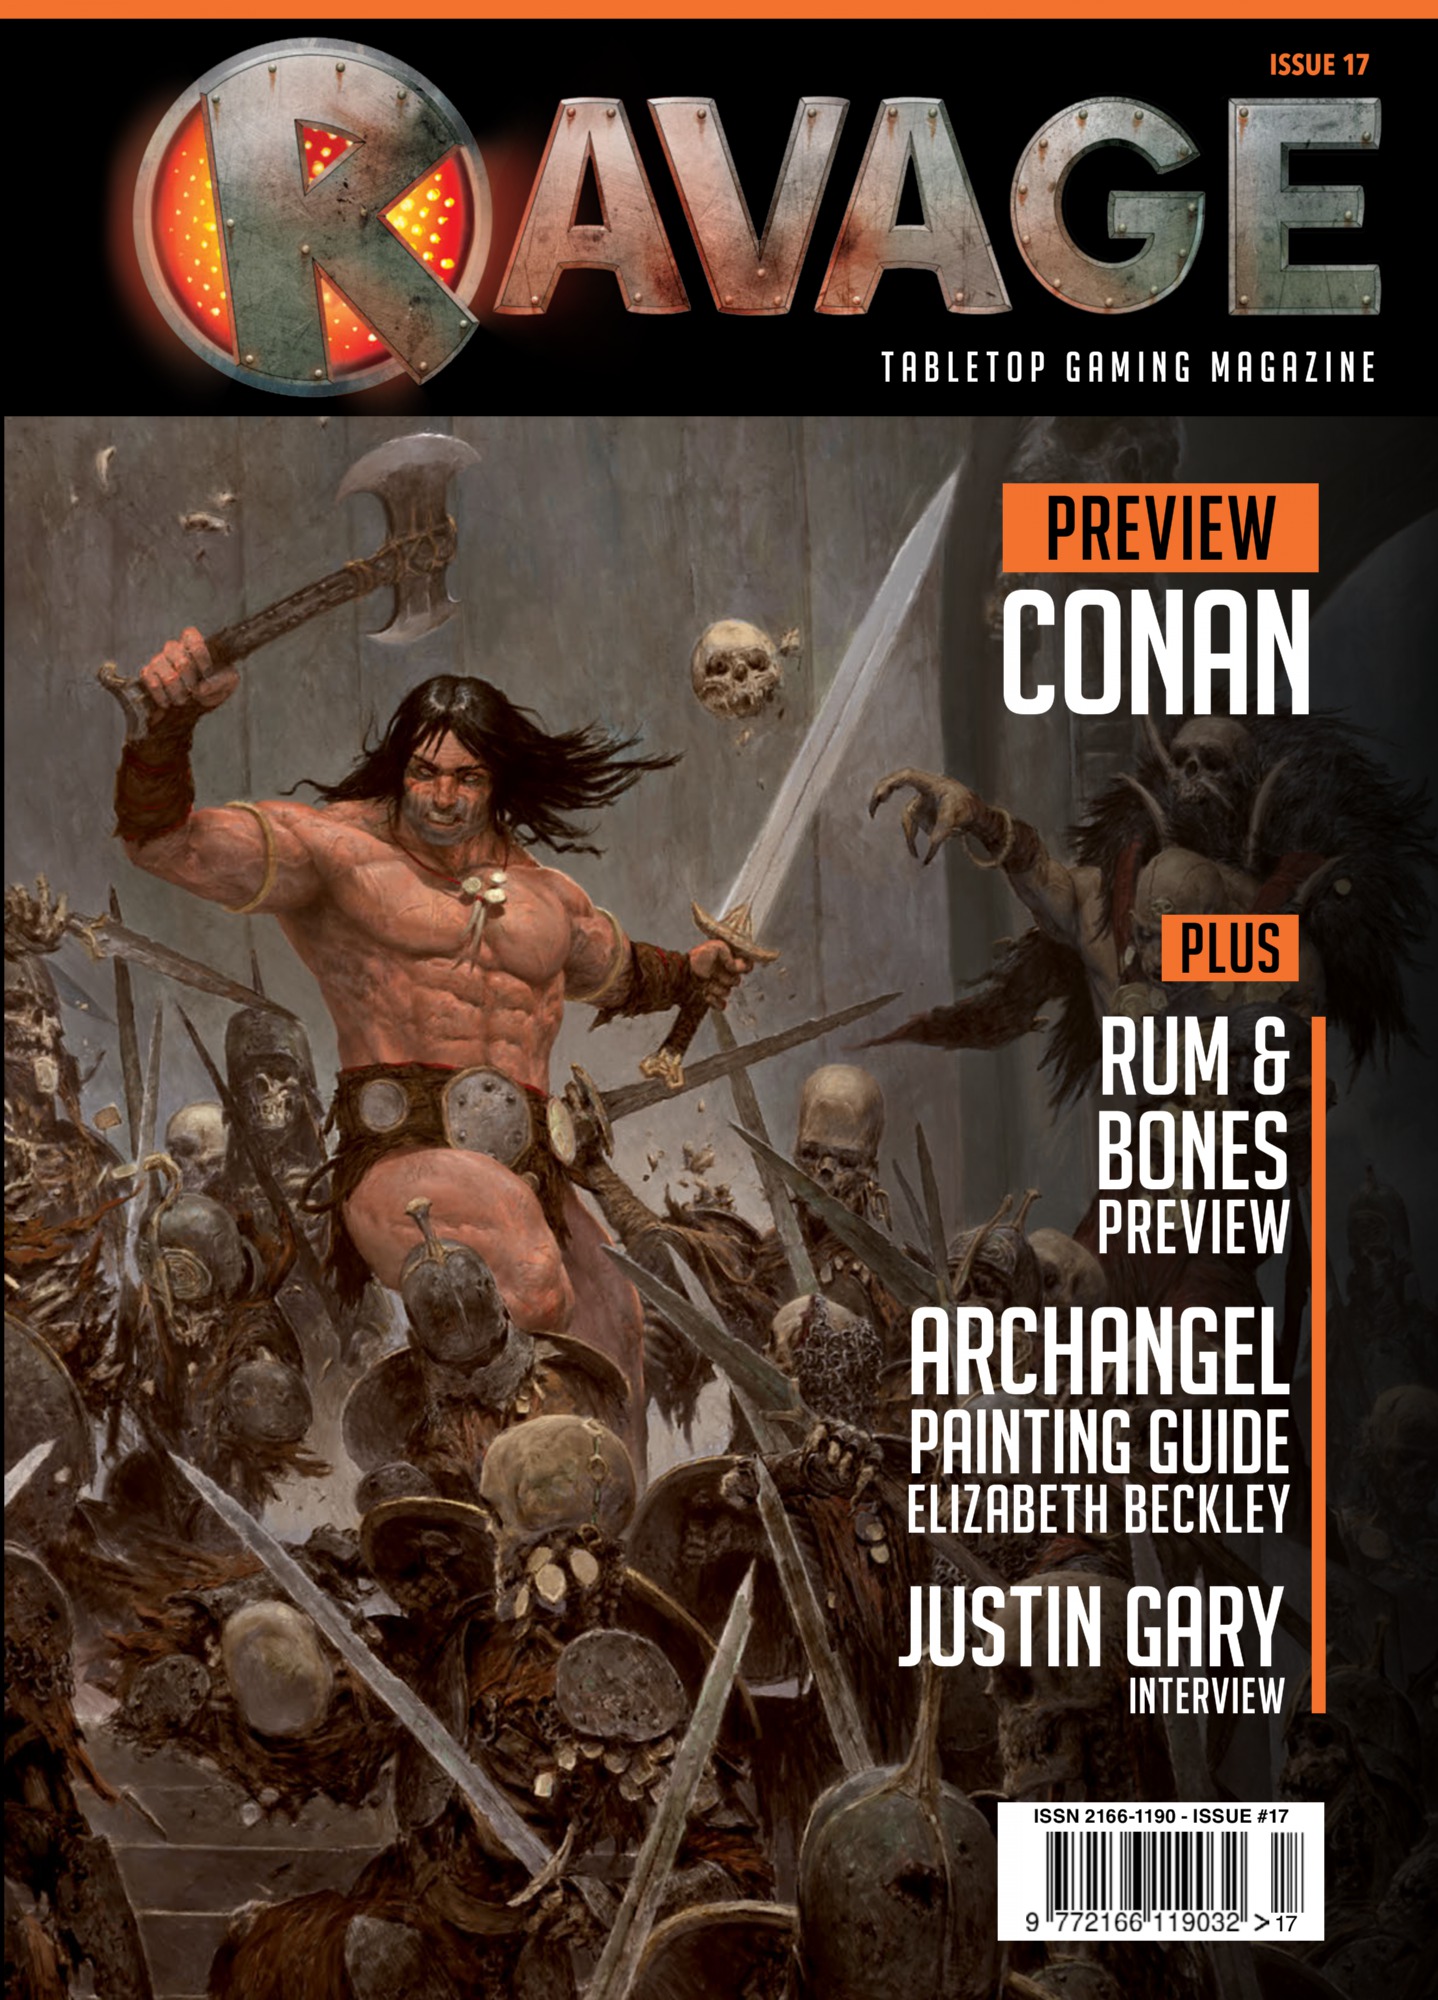 Ravage US Issue #17 Digital Edition Now Available